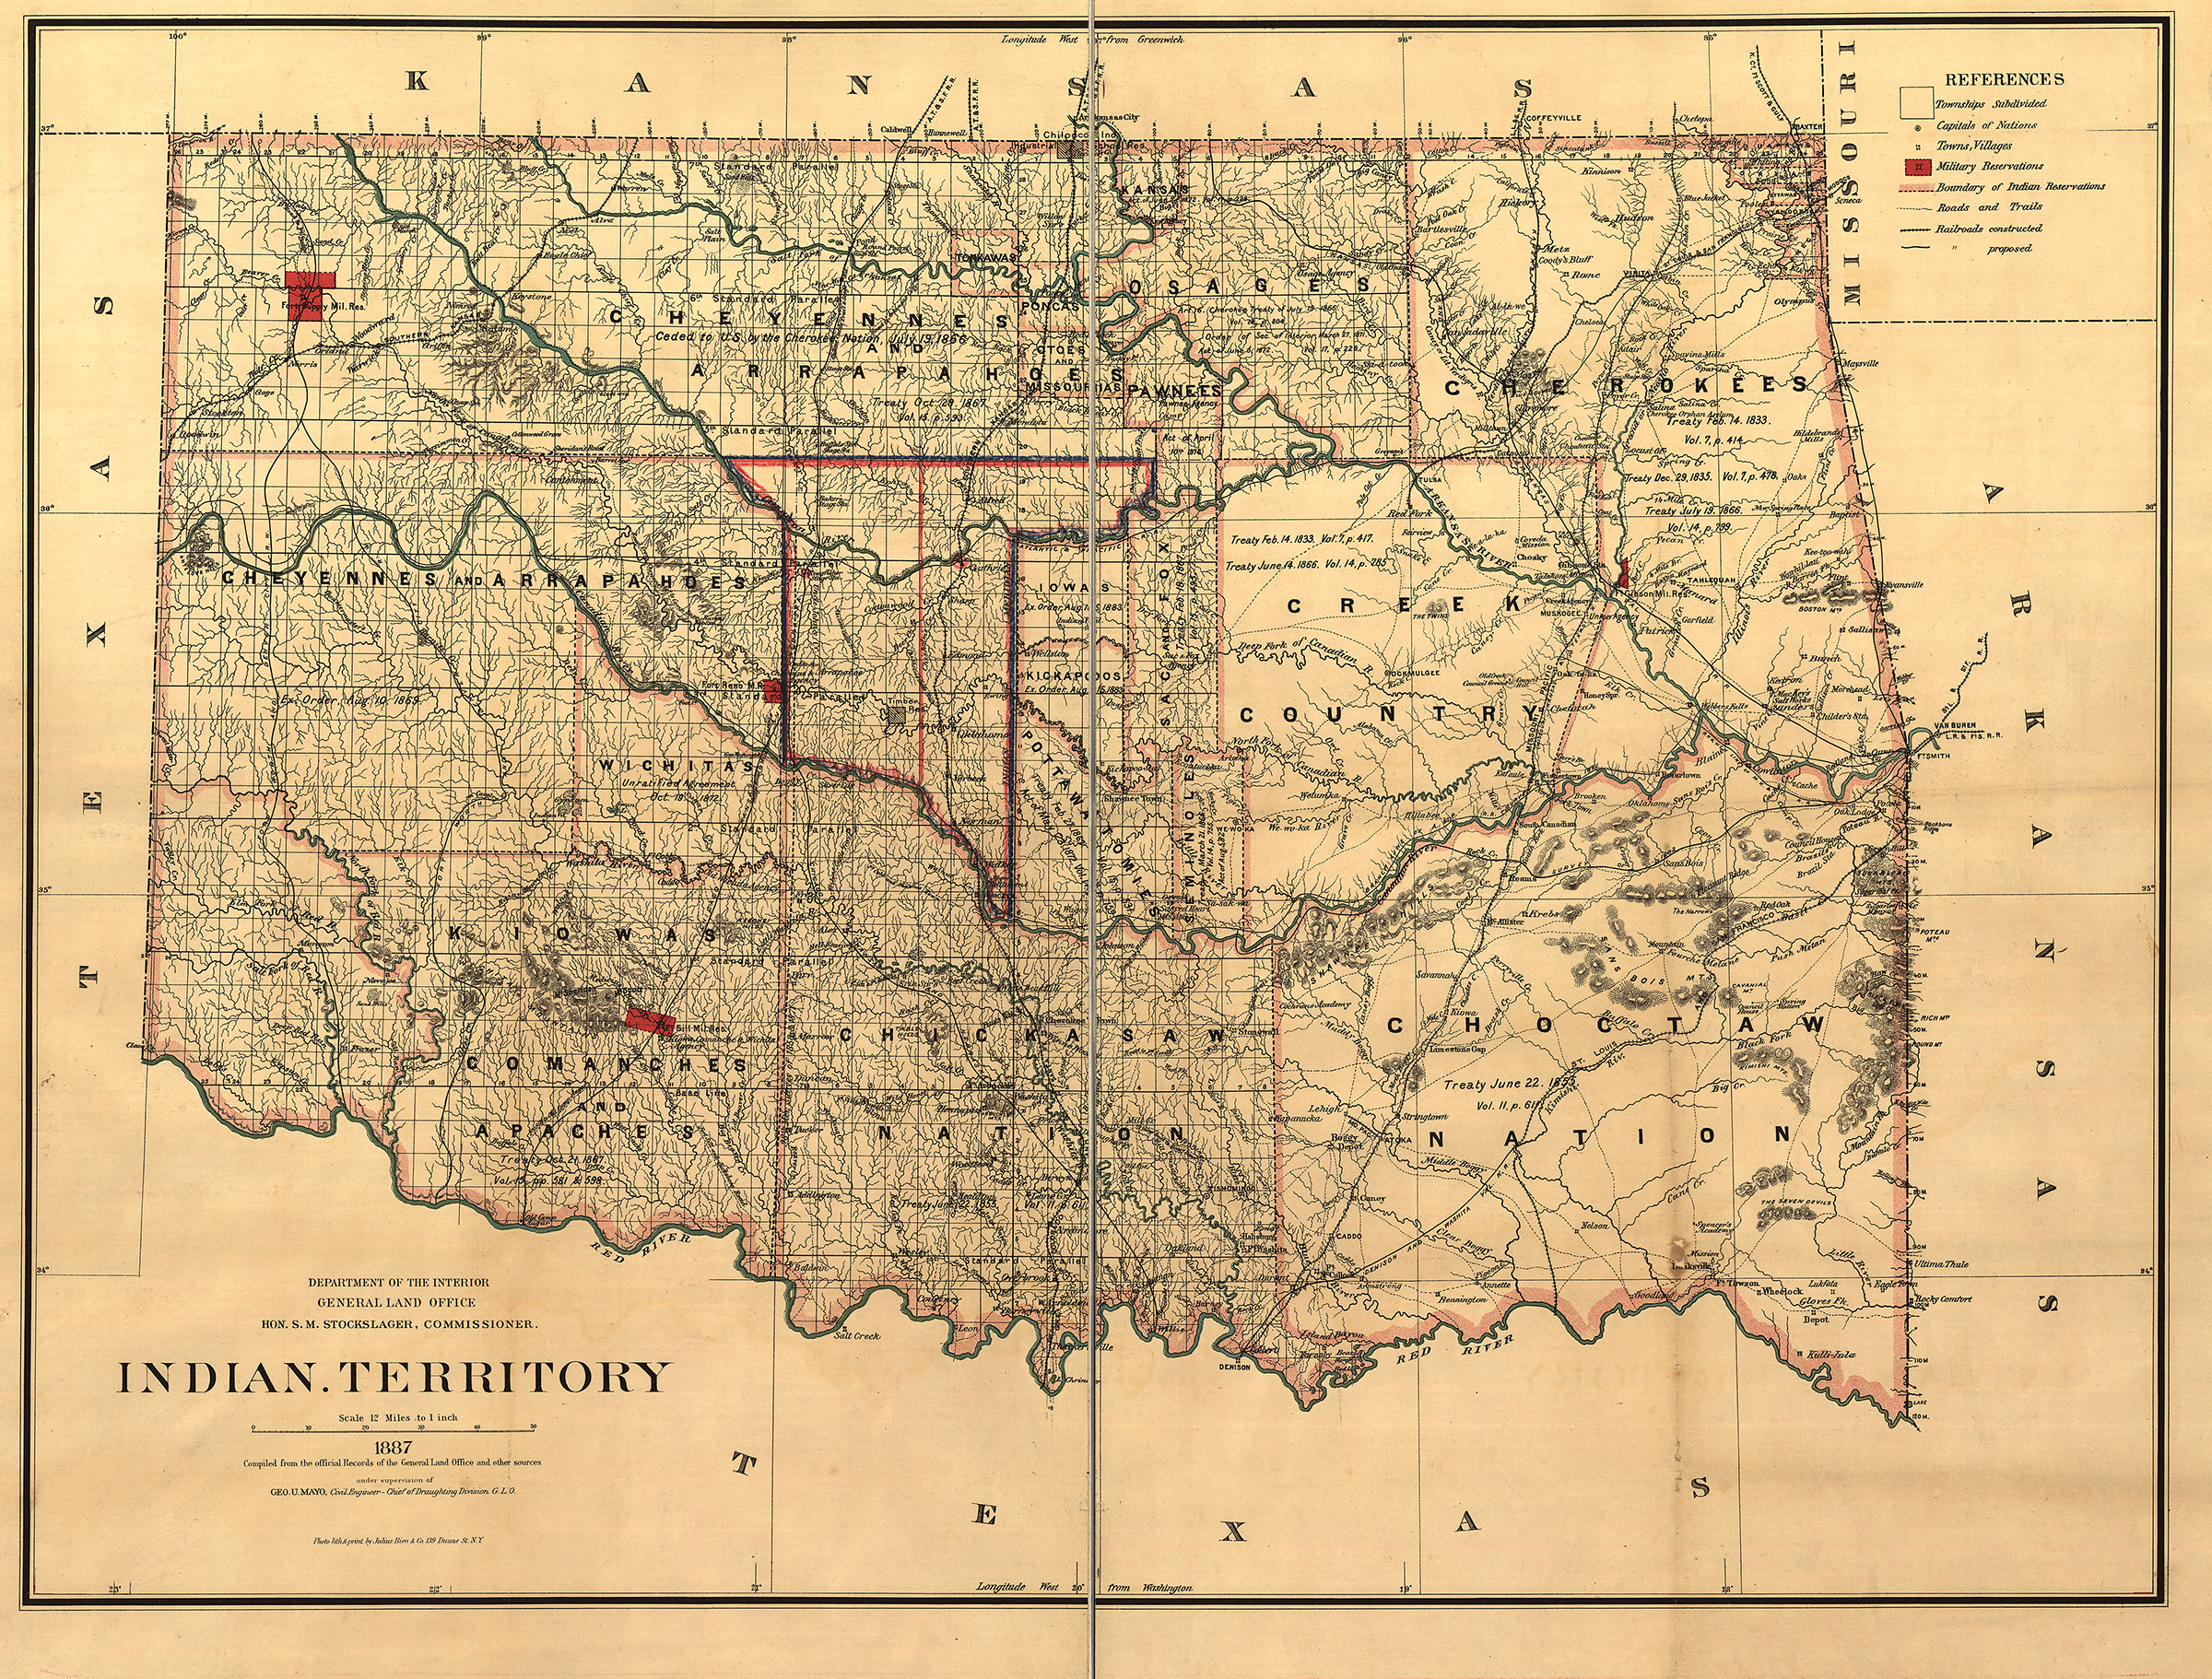 Indian Territory, Department of the Interior, 1887. (Universal History Archive/Universal Images Group via Getty Images)